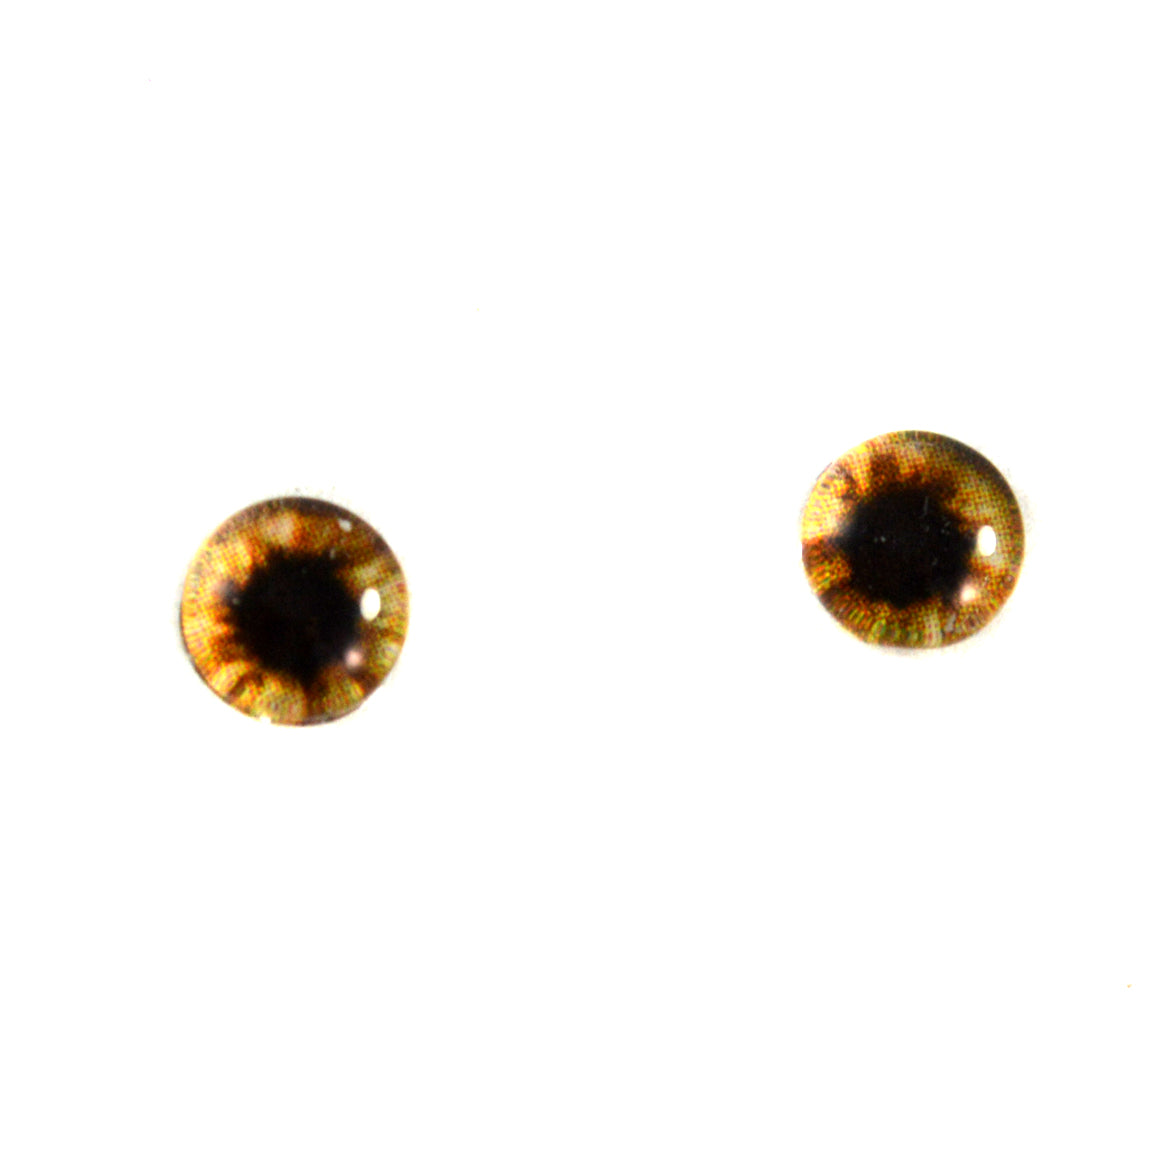 Brown Teddy Bear Handmade Glass Eyes 6mm to 40mm Jewelry Cabochon